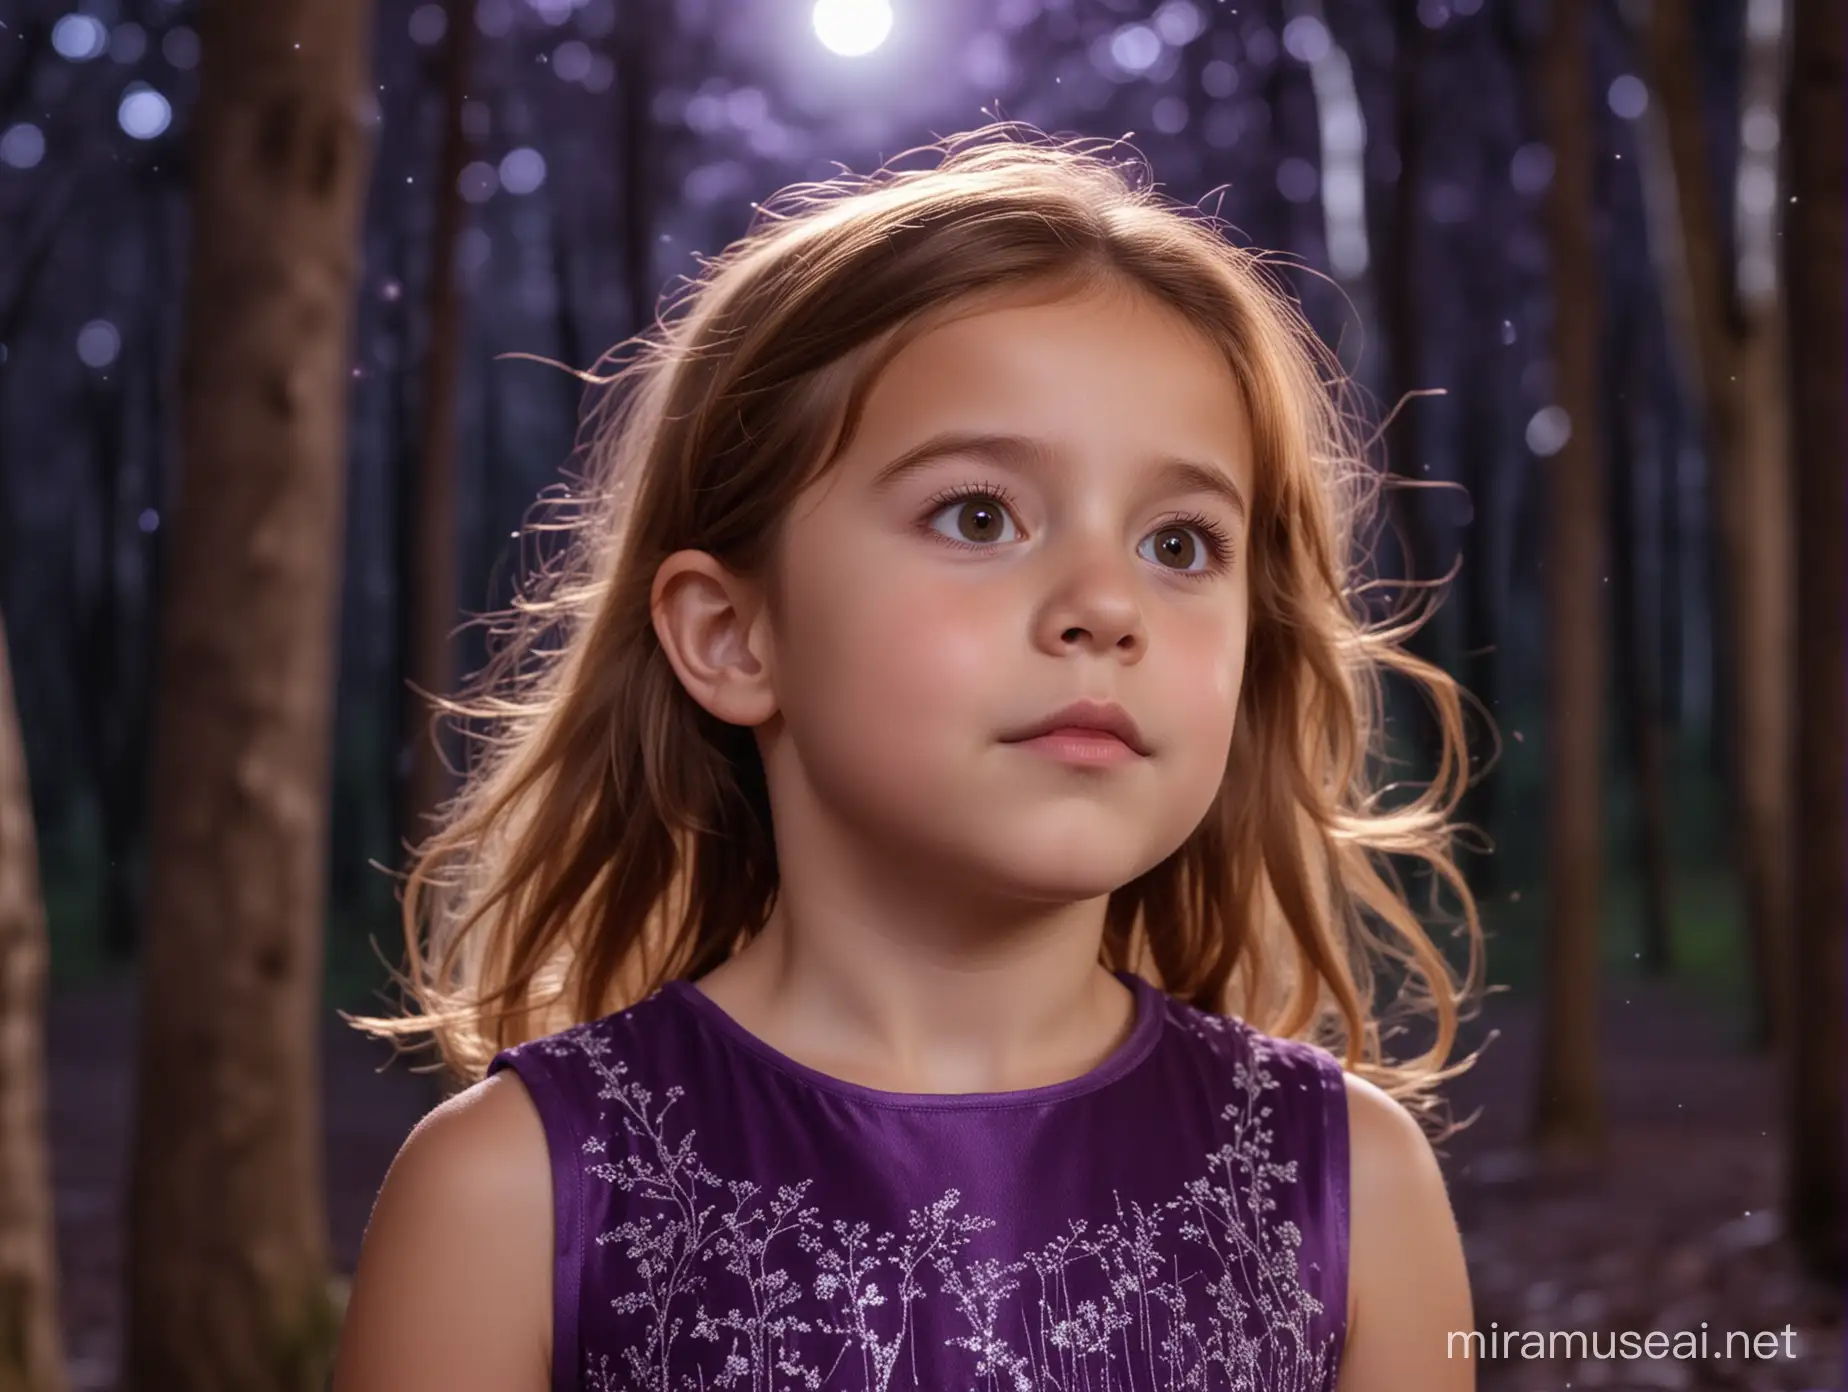 Enchanted ChestnutHaired Girl Squinting in Moonlit Forest